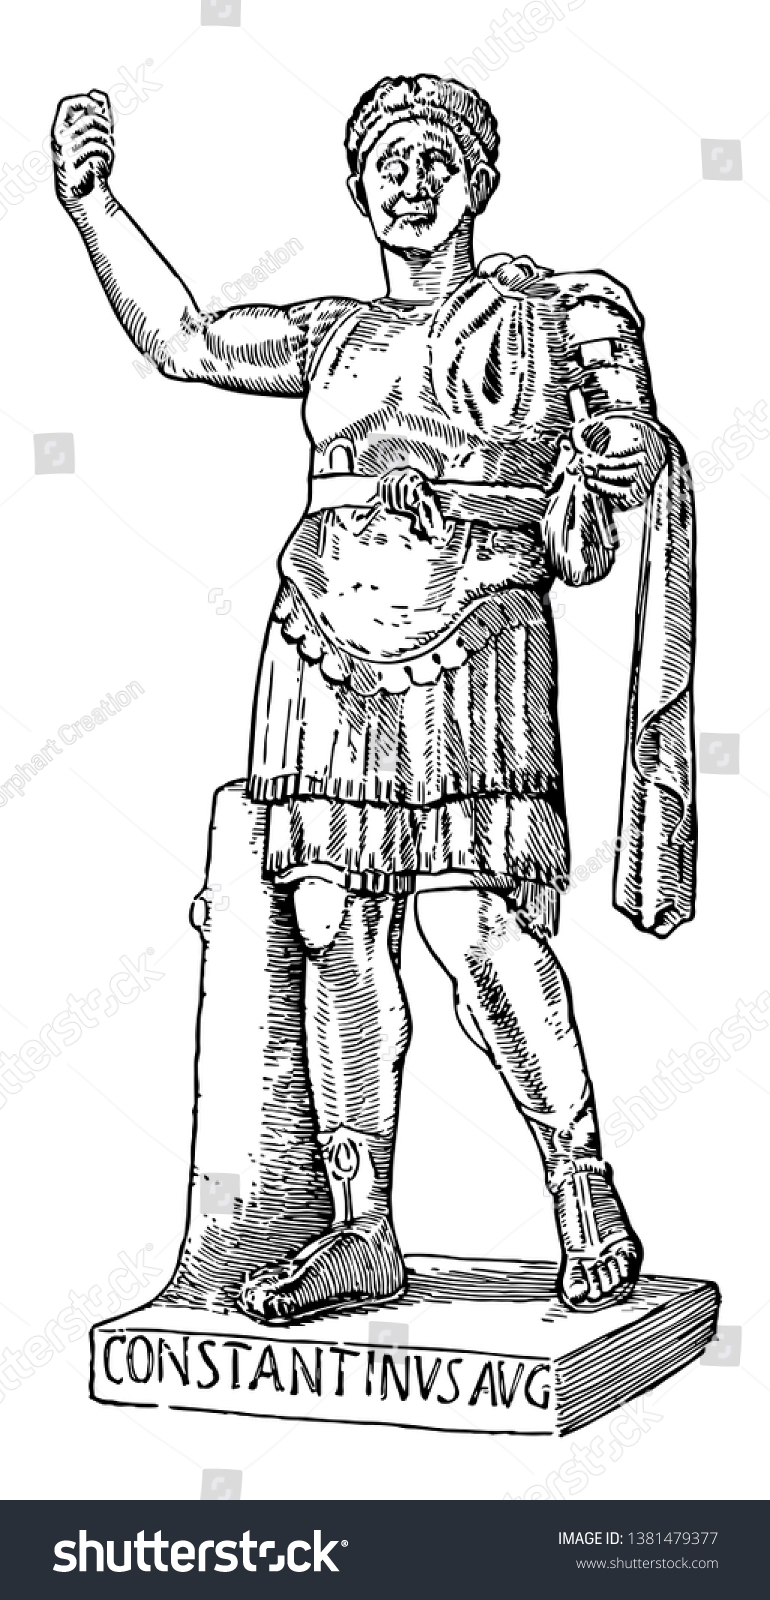 SVG of Constantine the Great, 272 AD-337AD, he was emperor of Rome from 306 to 337, famous for being the first Christian Roman emperor, vintage line drawing or engraving illustration svg